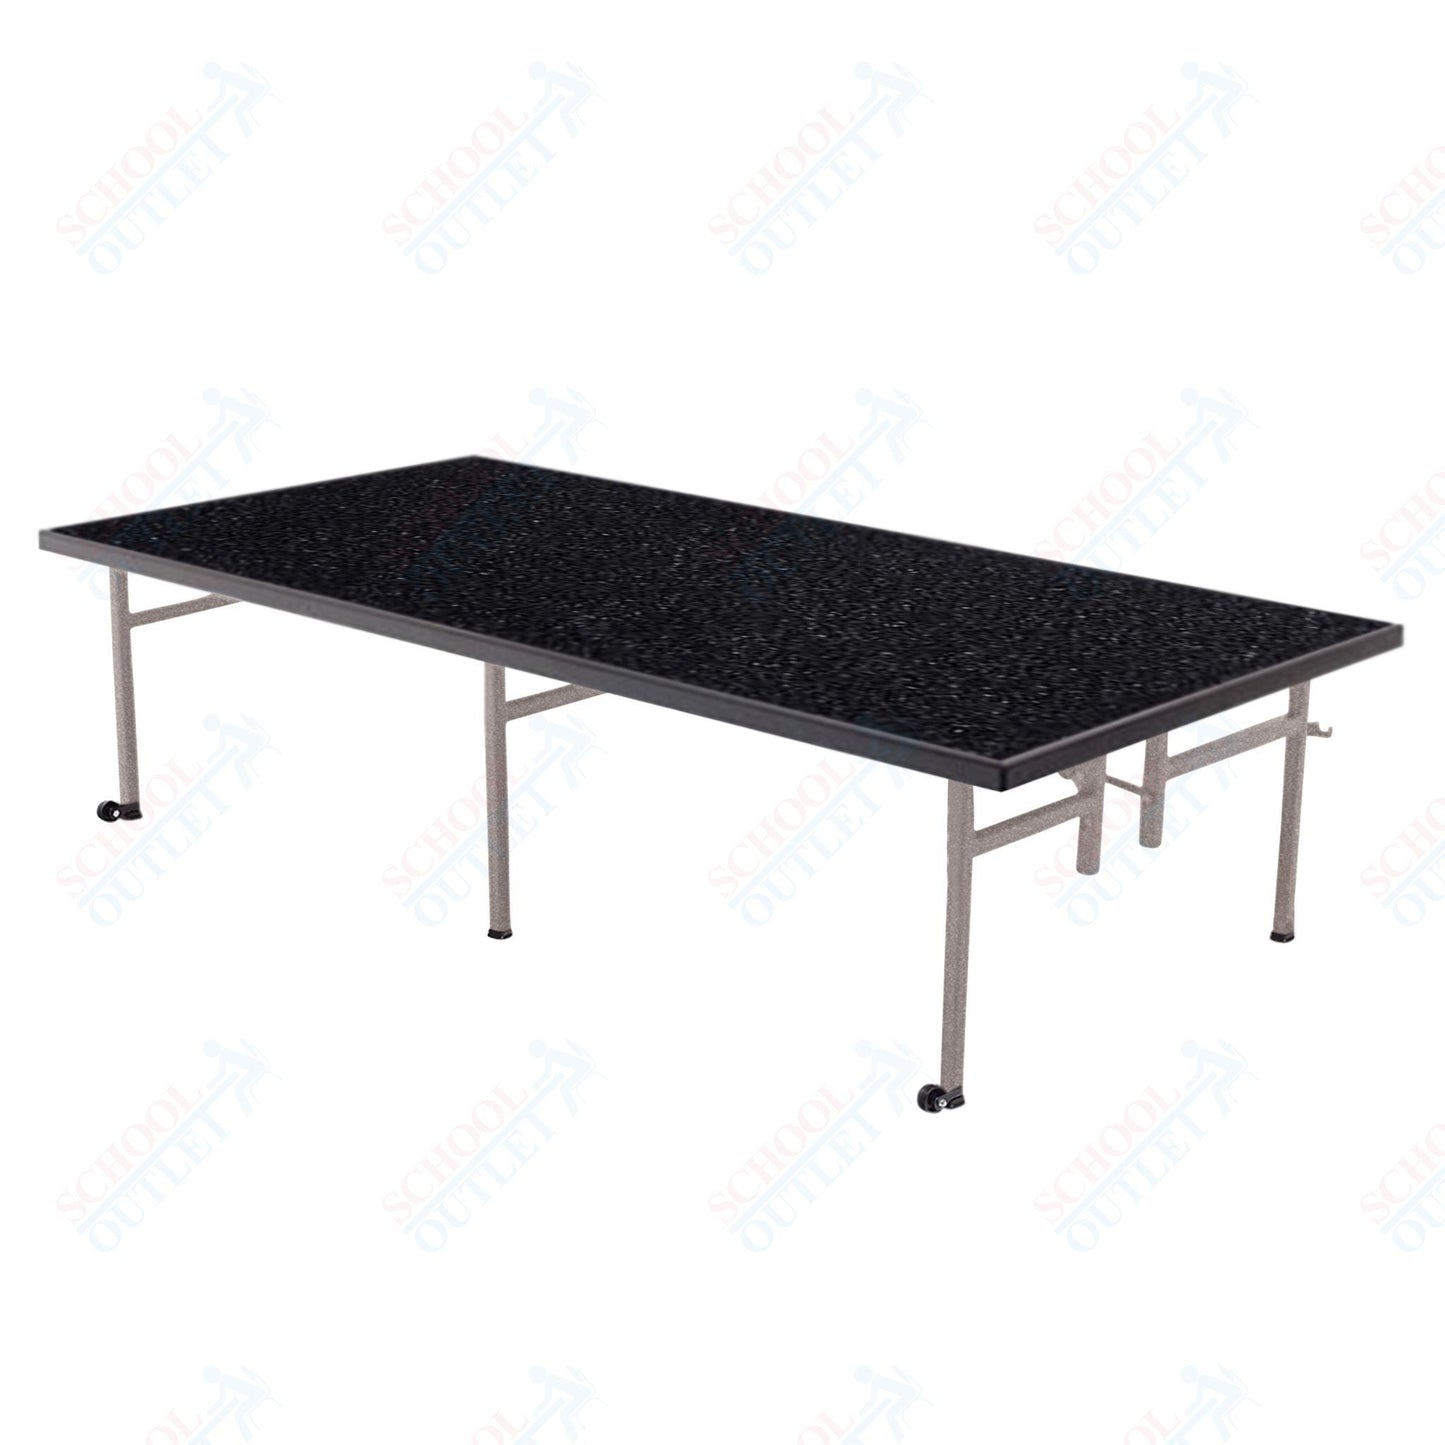 AmTab Fixed Height Stage - Carpet Top - 36"W x 72"L x 24"H (AmTab AMT - ST3624C) - SchoolOutlet